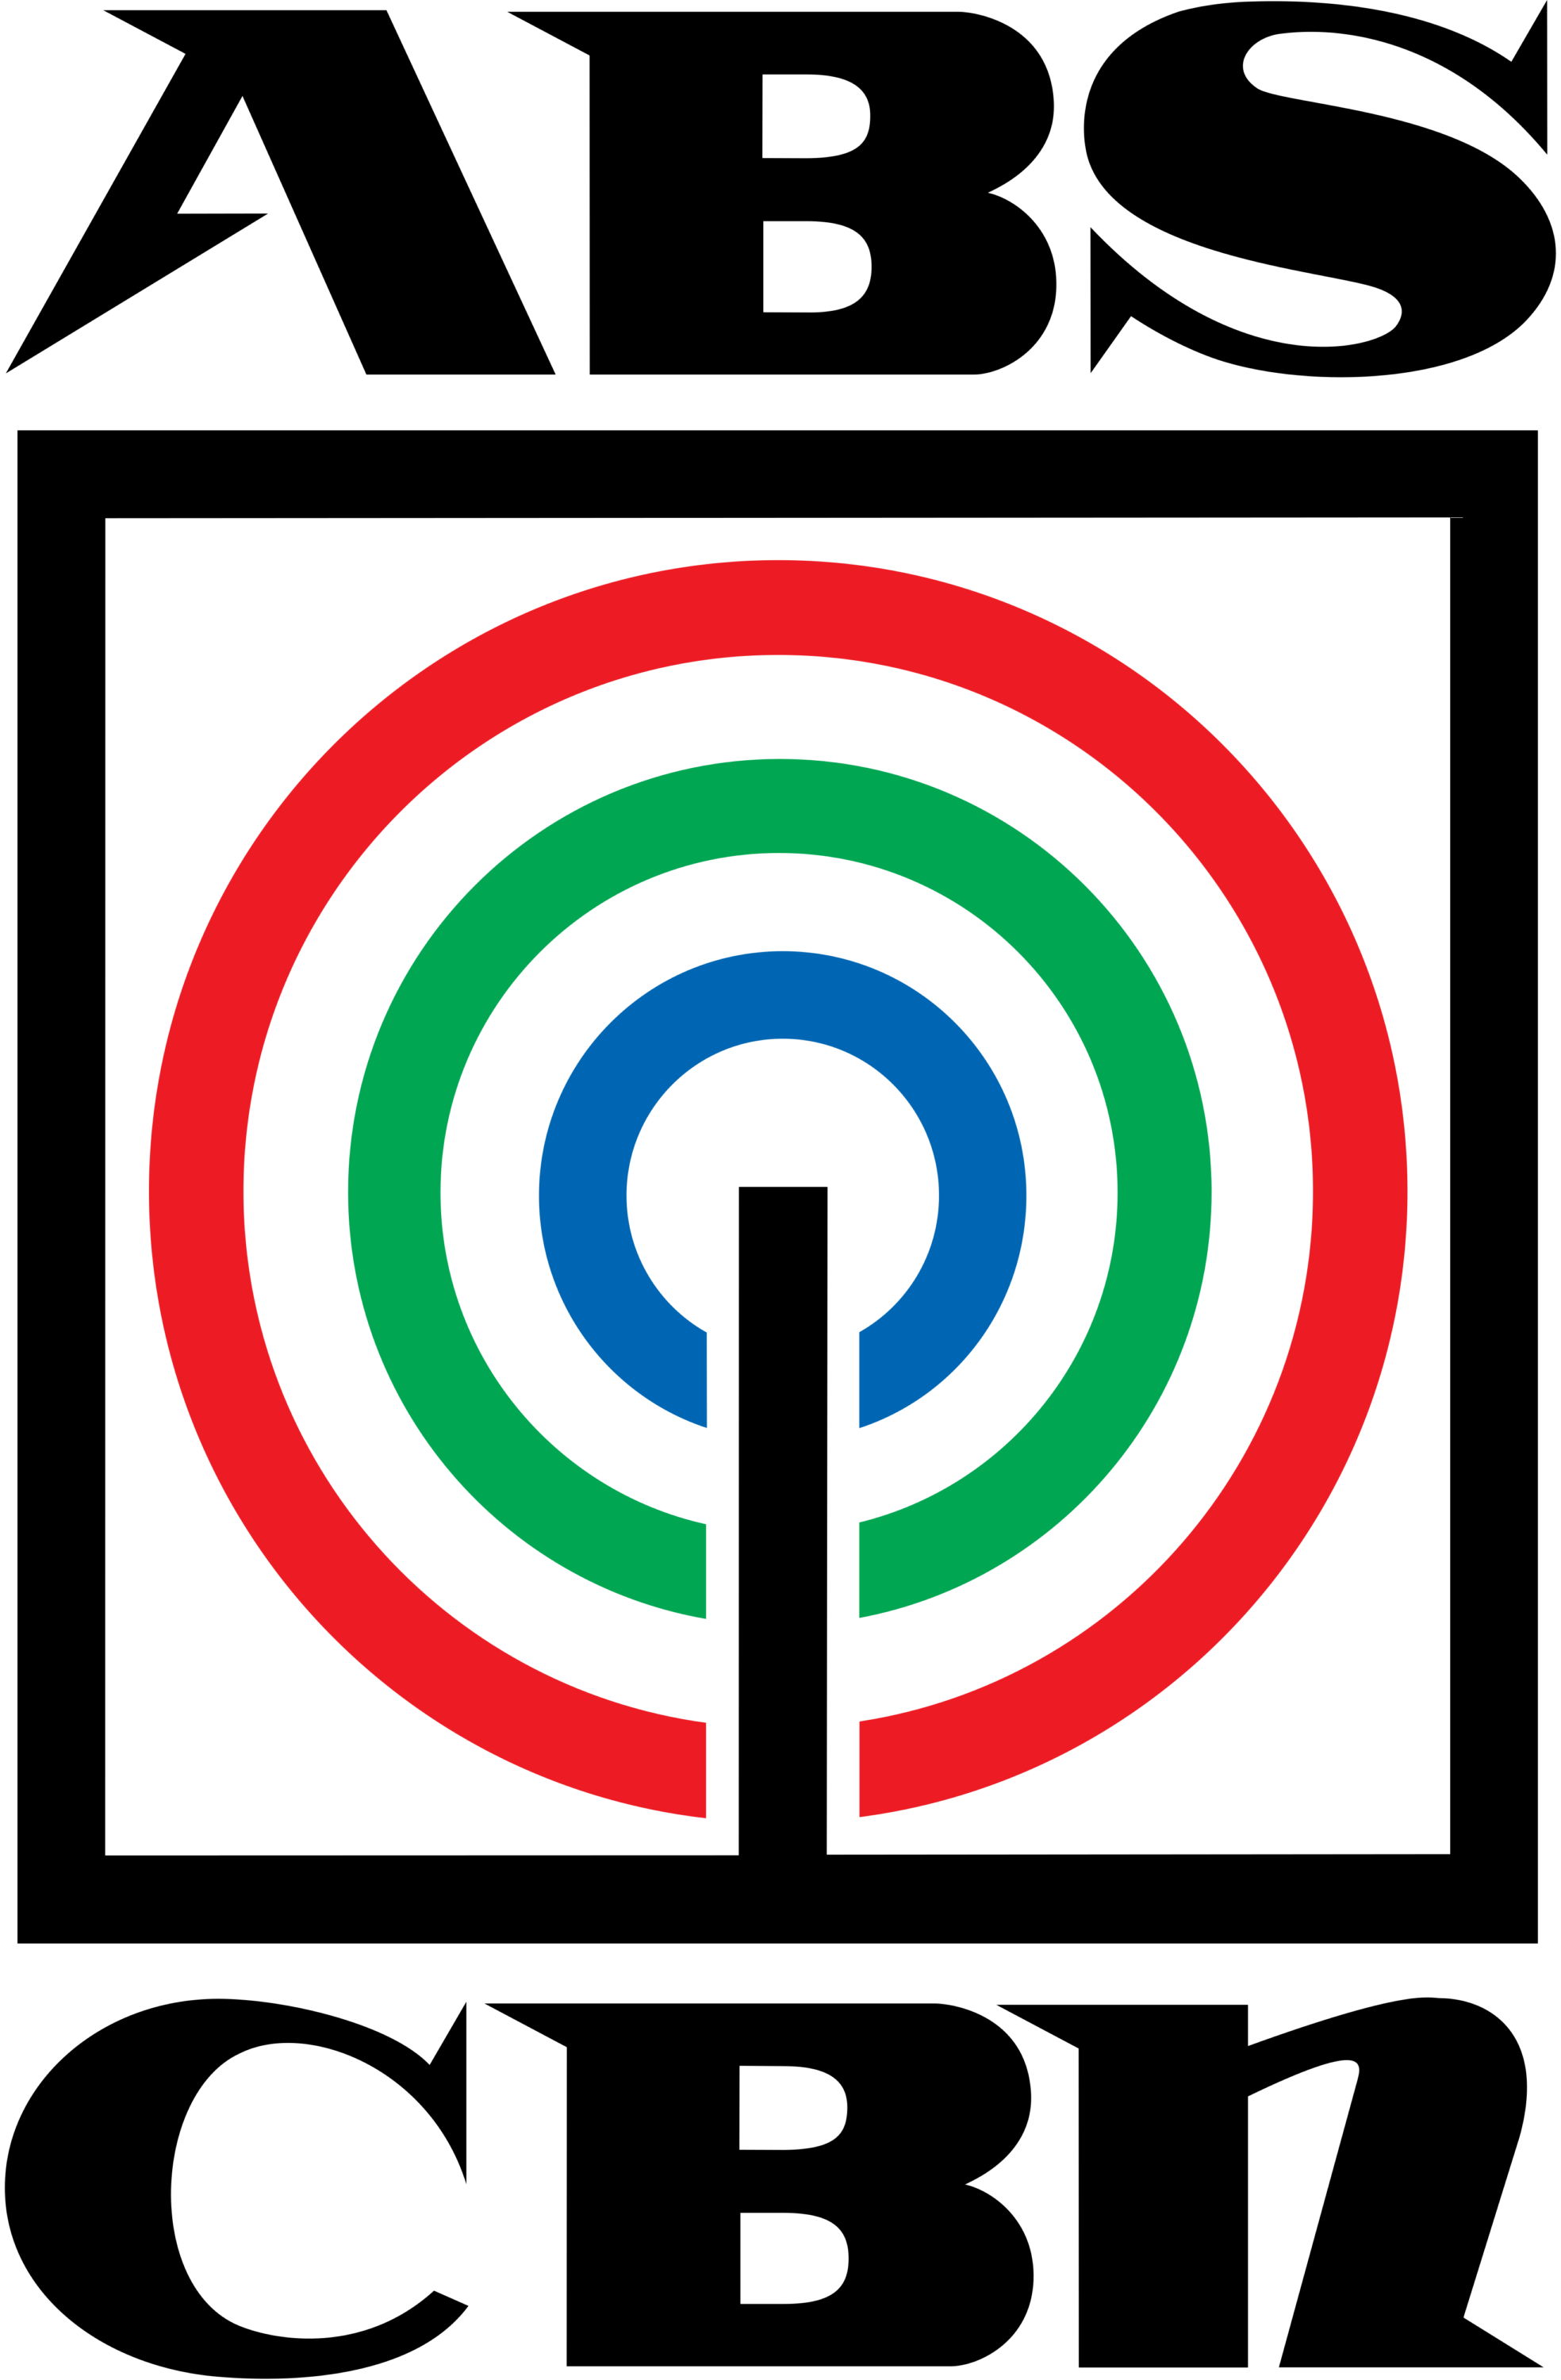 Alto Broadcasting System Chronicle Broadcasting Network (ABS CBN) Logo 1986